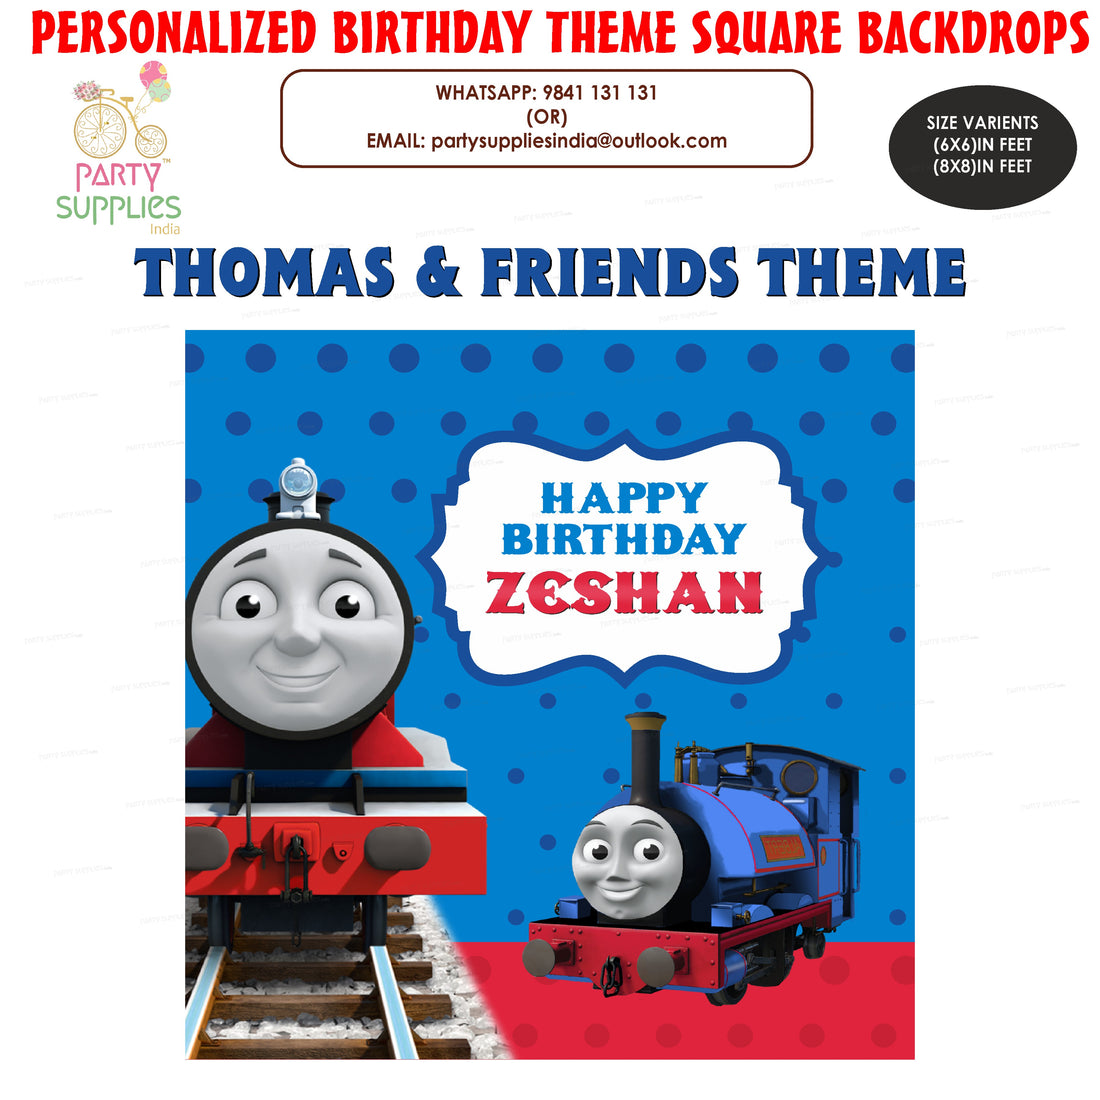 PSI Thomas and Friends Theme Personalized Square Backdrop